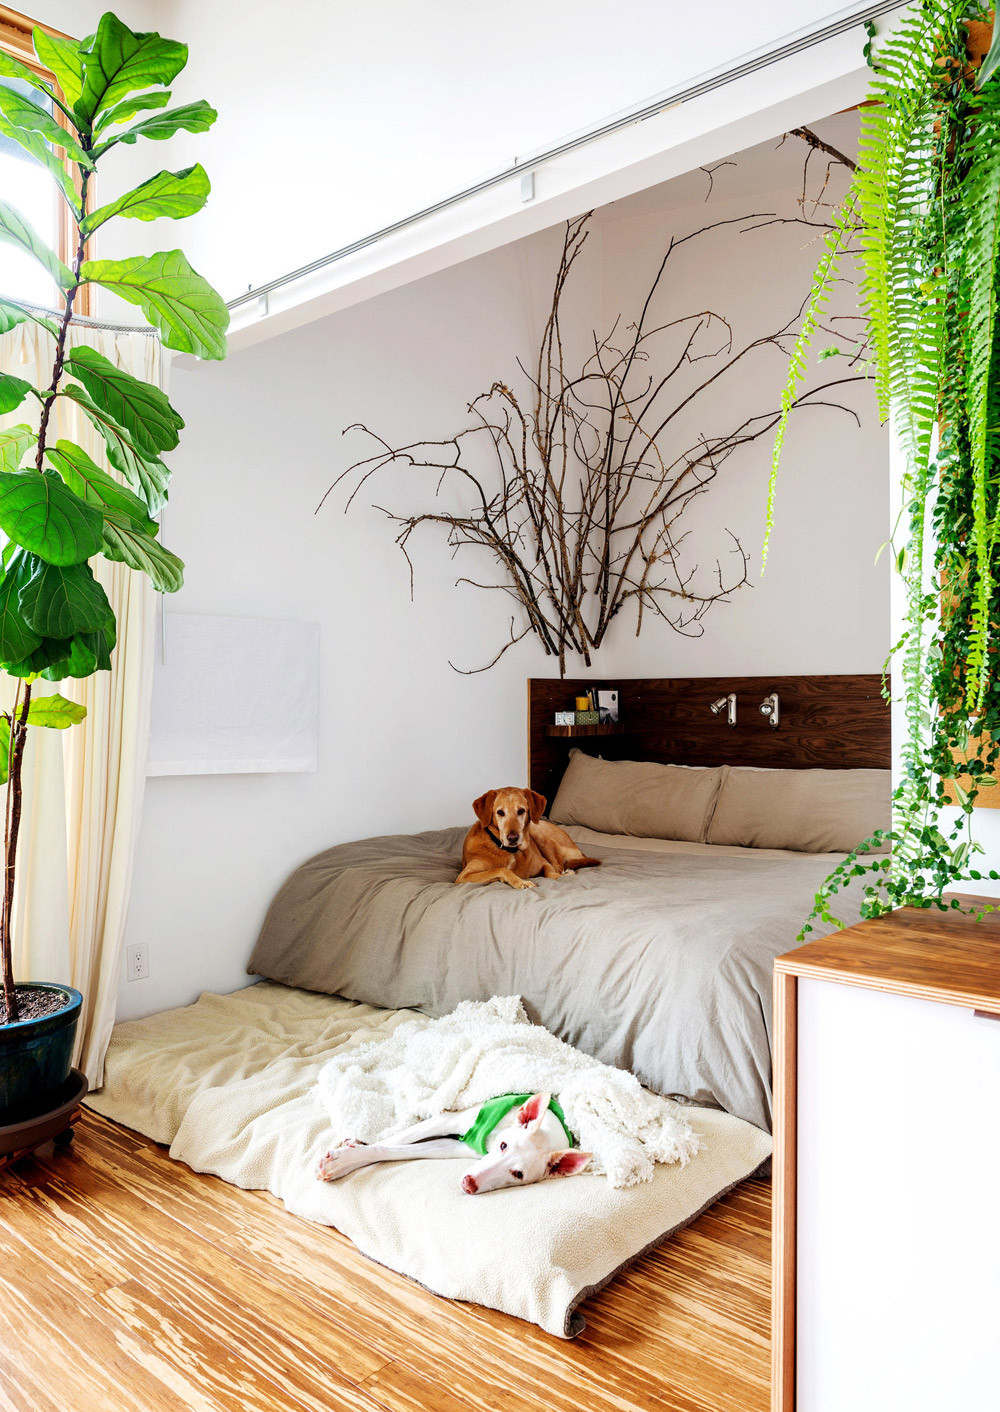 Small Bedroom Plants
 Design Highlight Bedrooms Using Live Plants as Decor